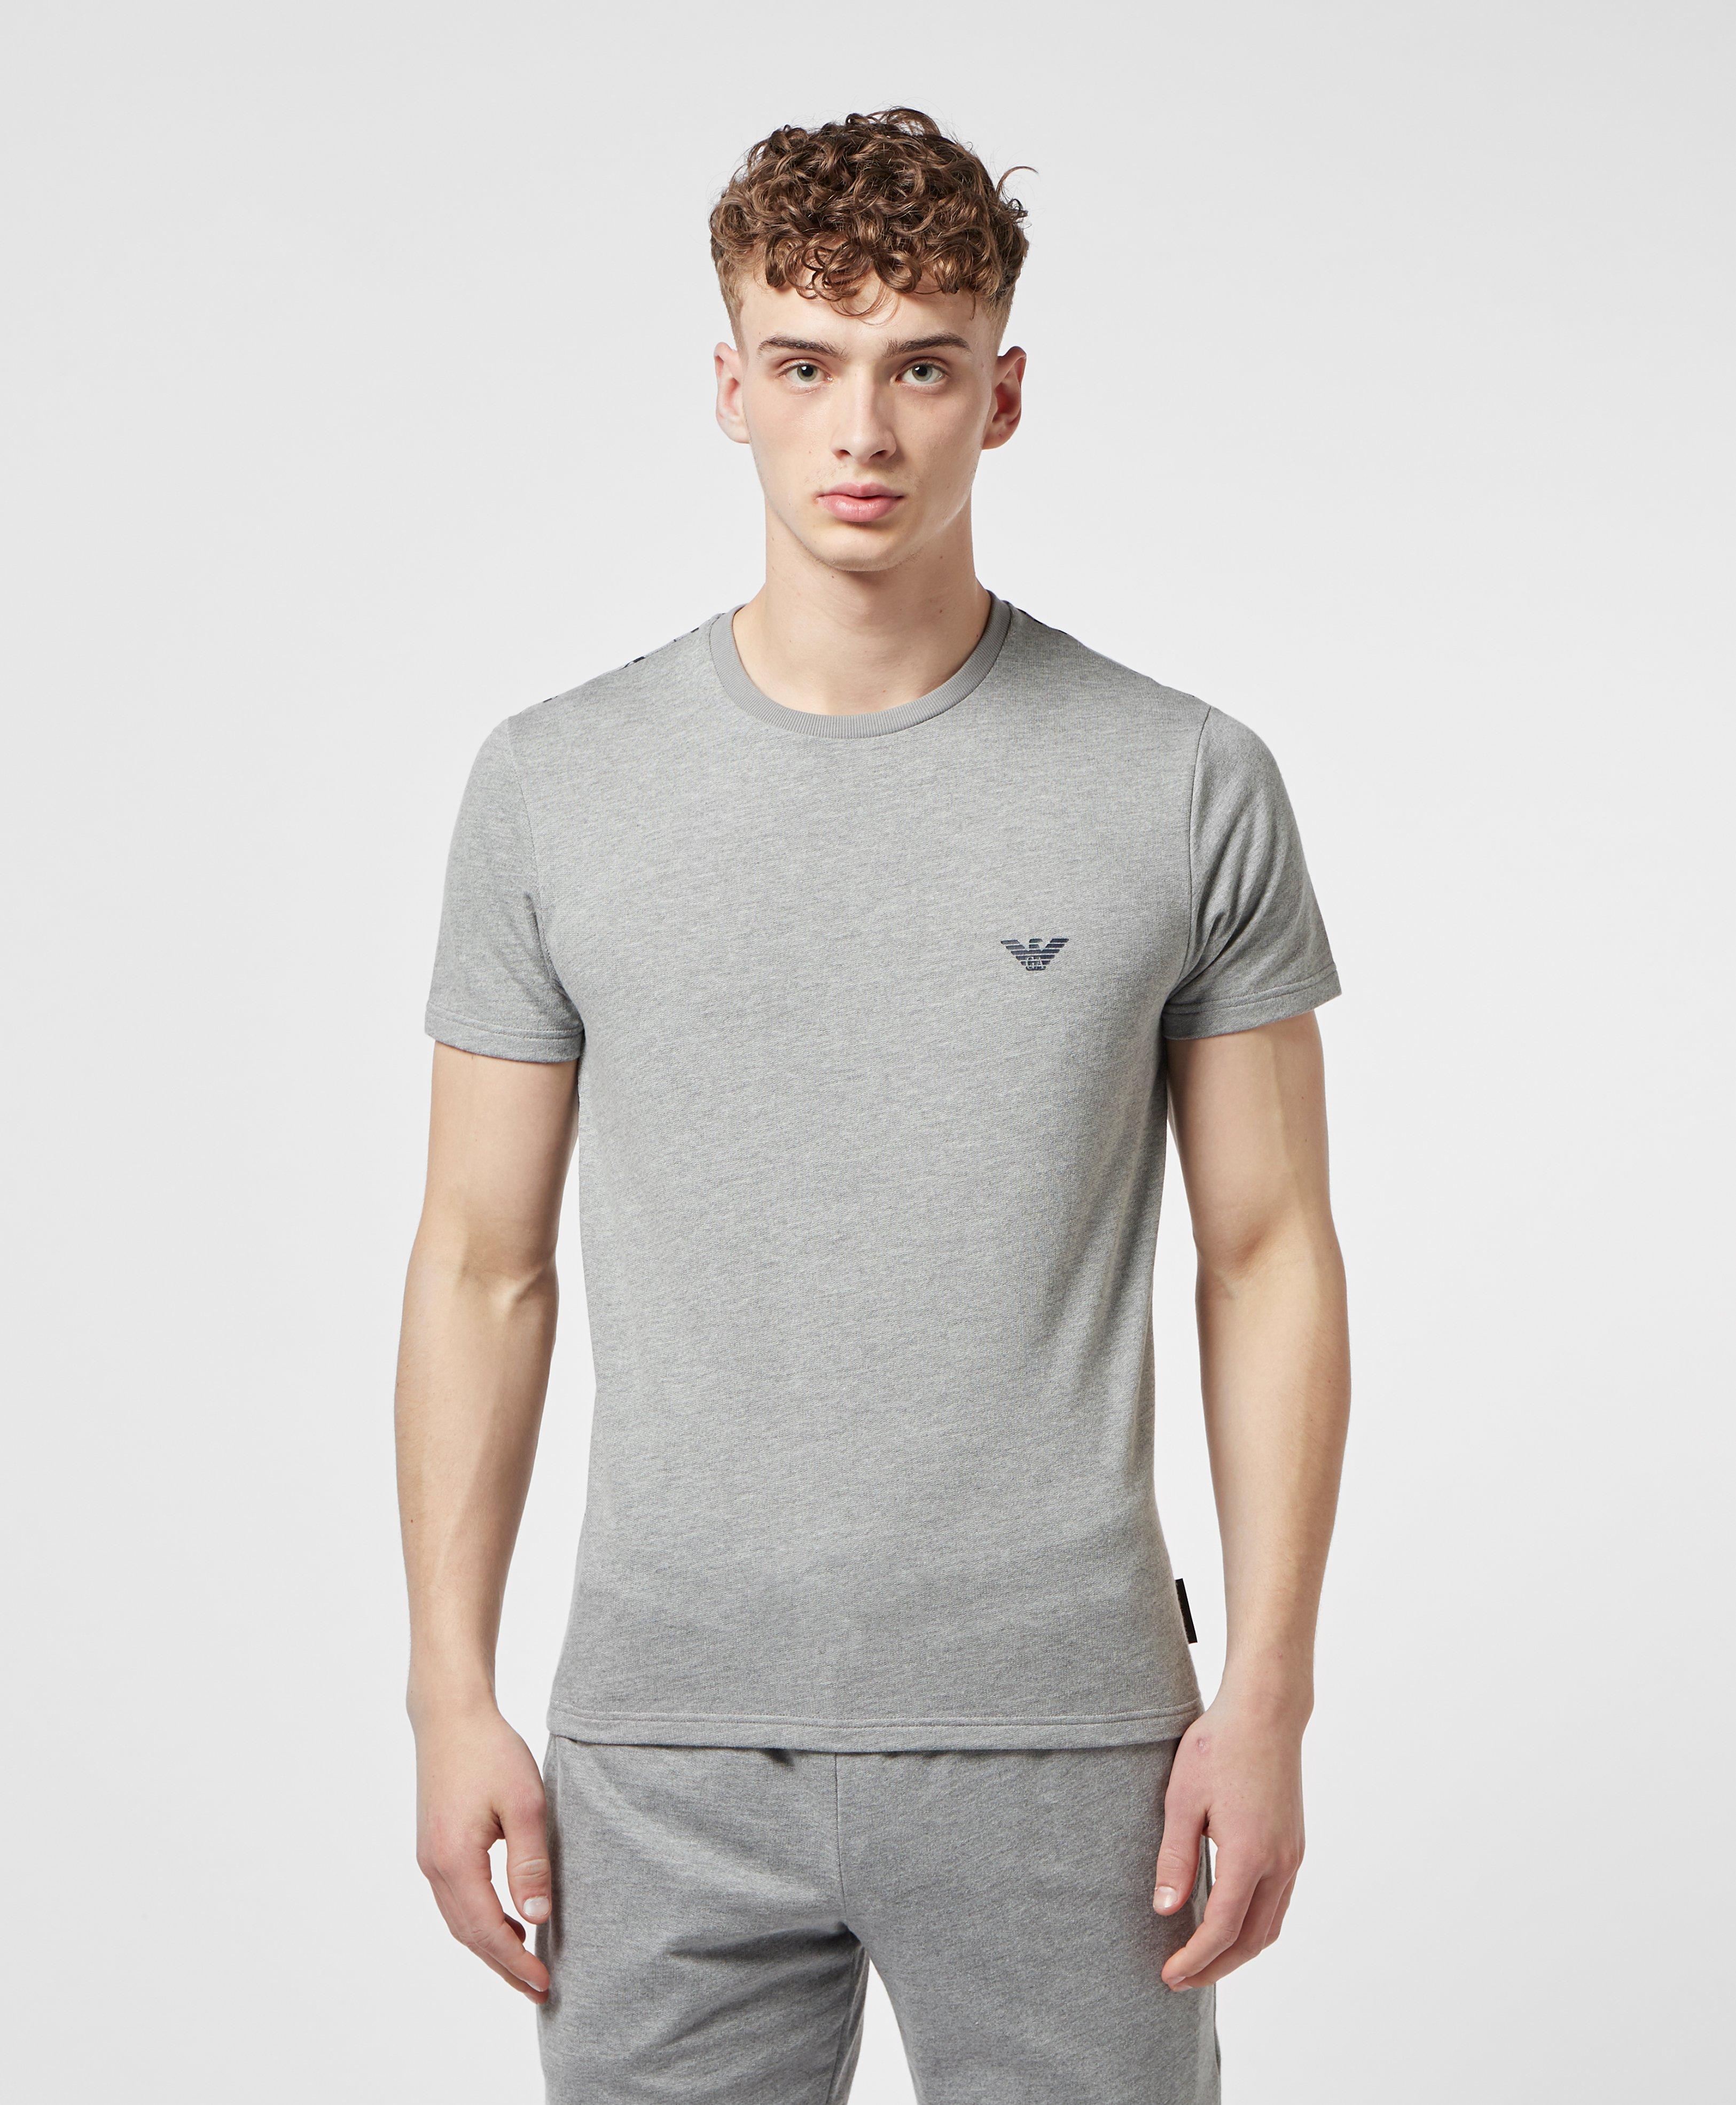 Emporio Armani Back Print Short Sleeve T-shirt in Gray for Men - Lyst